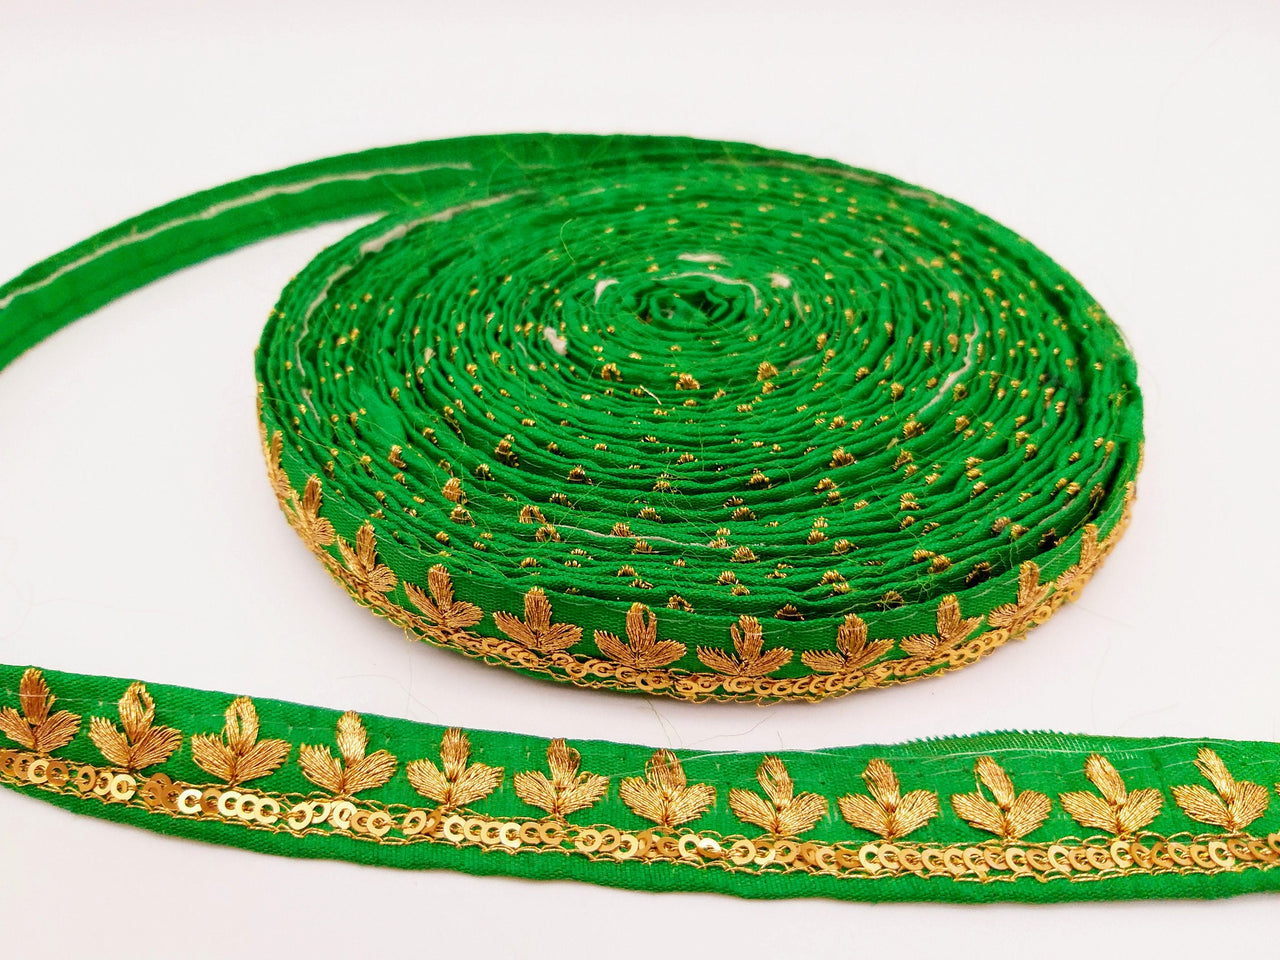 Green Art Silk Trim with Gold Floral Embroidery and Gold Sequins Indian Sari Border Trim By 3 Yards Decorative Trim Craft Lace